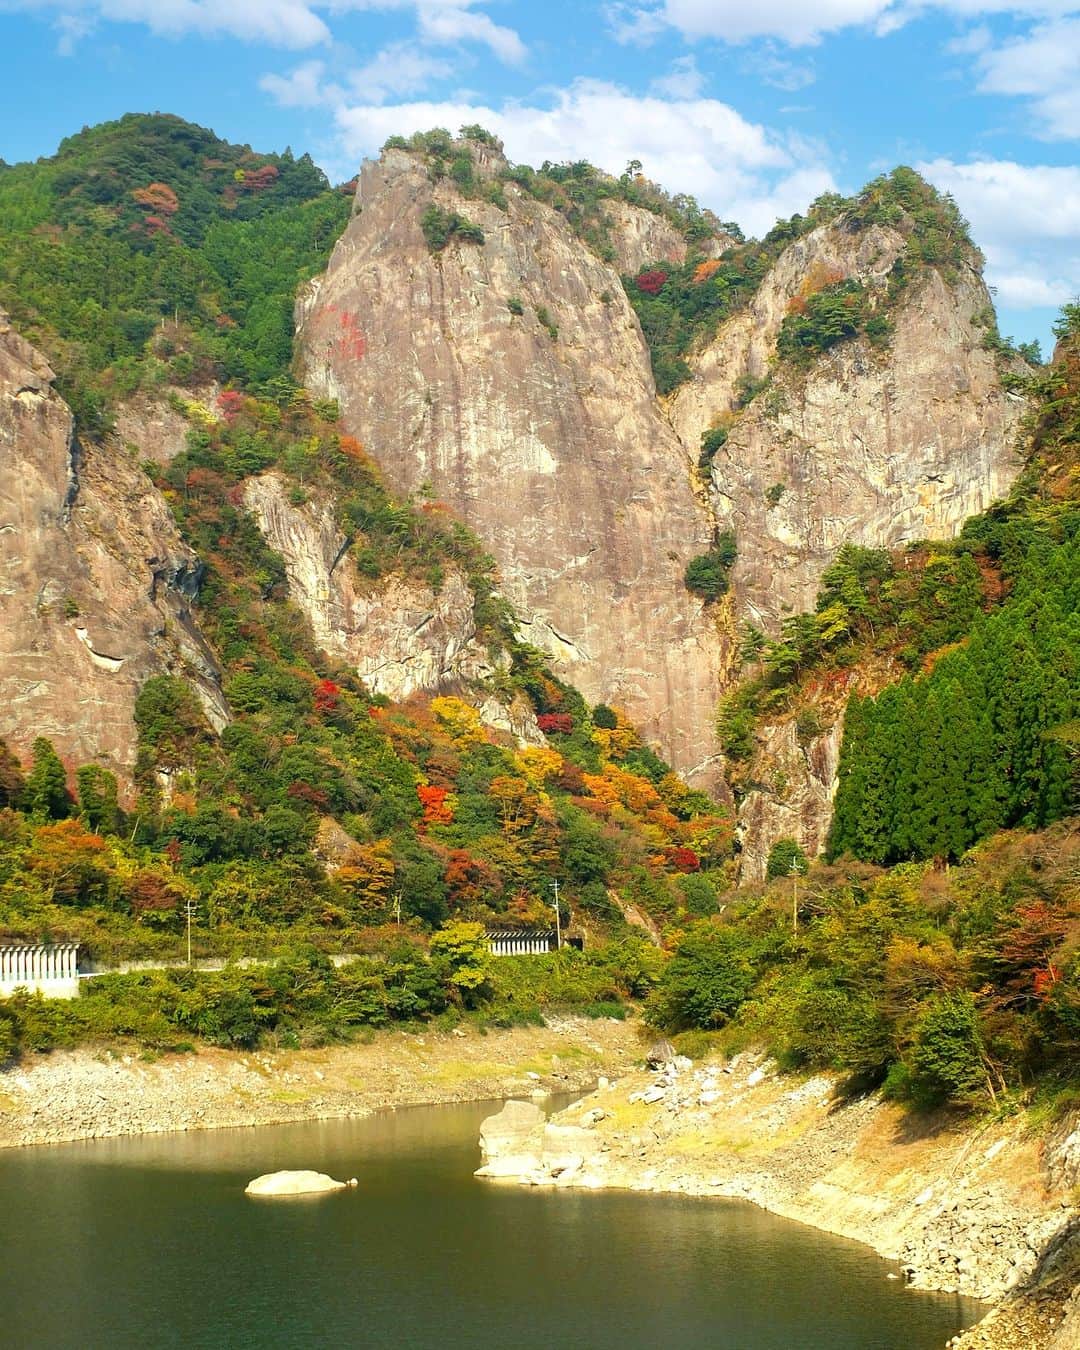 Birthplace of TONKOTSU Ramen "Birthplace of Tonkotsu ramen" Fukuoka, JAPANのインスタグラム：「Hyugami Gorge - A Heart-Shaped Rock Created by Nature!🪨🥰 Hyugami Gorge in Yame is a roughly 6-kilometer-long gorge whose beauty is said to have attracted the deities of Hyuga (modern day Miyazaki Prefecture).✨  Among its many large and strangely shaped rocks, "Heart Rock" has become a hit as a spiritual spot for those wishing for luck in romance. The impressive Heart Rock stands 220 meters tall and 180 meters wide, and can be seen up close from the red arched Kehogi Bridge.🧡  Red leaves decorate the area around Heart Rock from early to mid-November, while approximately 1,000 cherry trees bloom around its lake from late March to early April. The red bridge and deep green of the trees also form a beautiful contrast in summer.🌳  ------------------------- FOLLOW @goodvibes_fukuoka for more ! -------------------------  #fukuoka #fukuokajapan #kyushu #kyushutrip #explorejapan #instajapan #visitjapan #japantrip #japantravel #japangram #japanexperience #beautifuljapan #japanlovers #visitjapanjp #japanesenature」